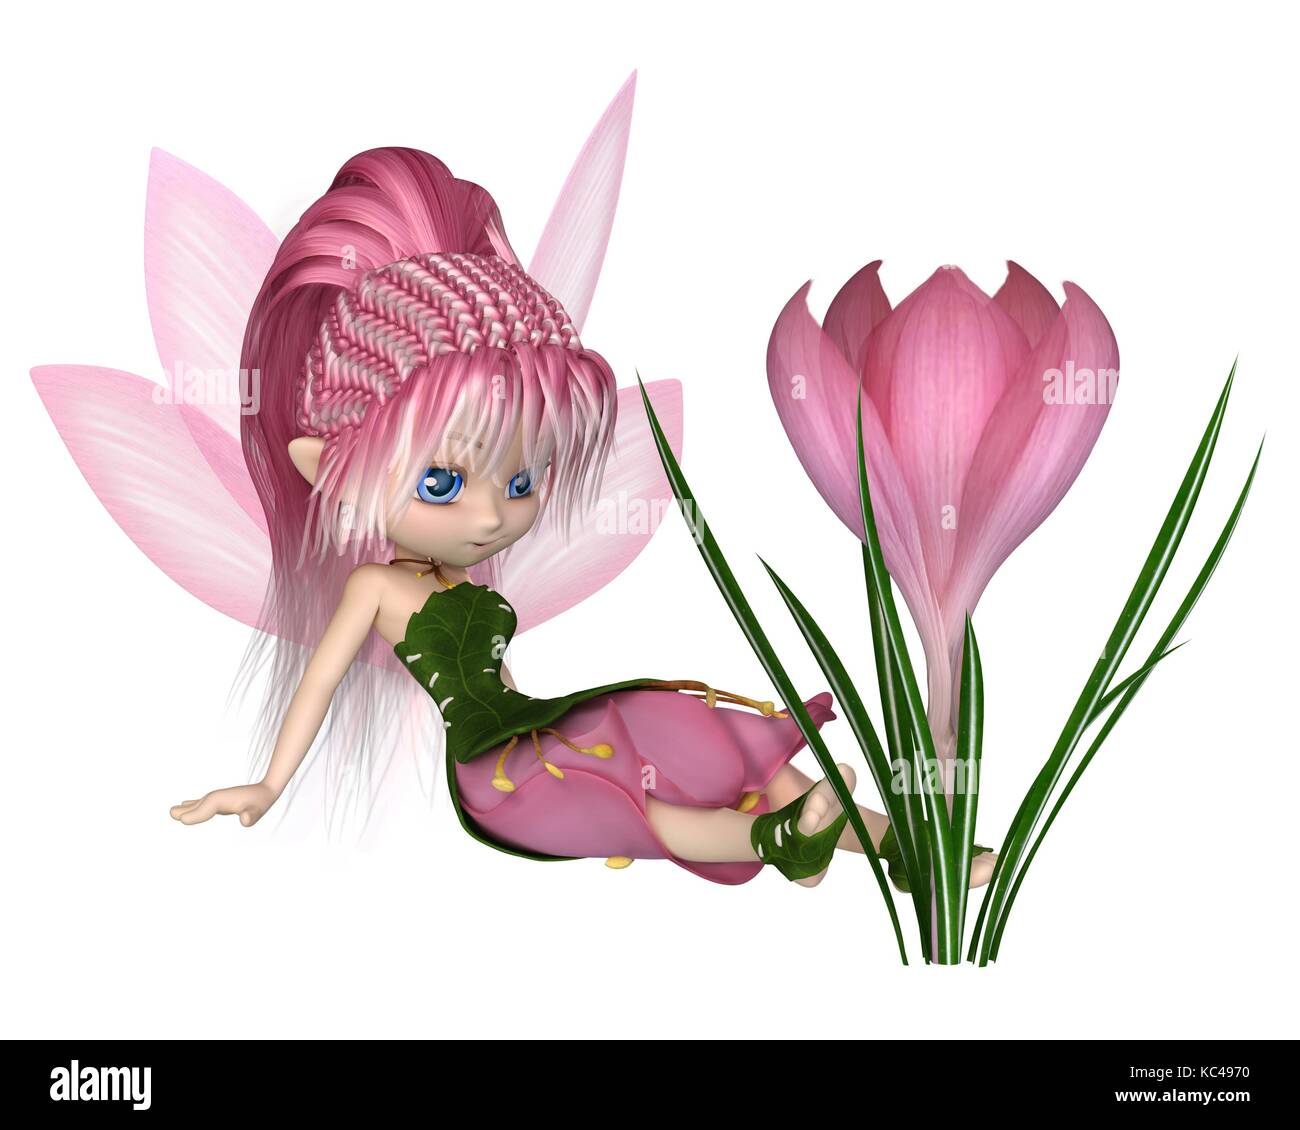 Cute Toon Pink Crocus Fairy, Sitting by a Flower Stock Photo - Alamy